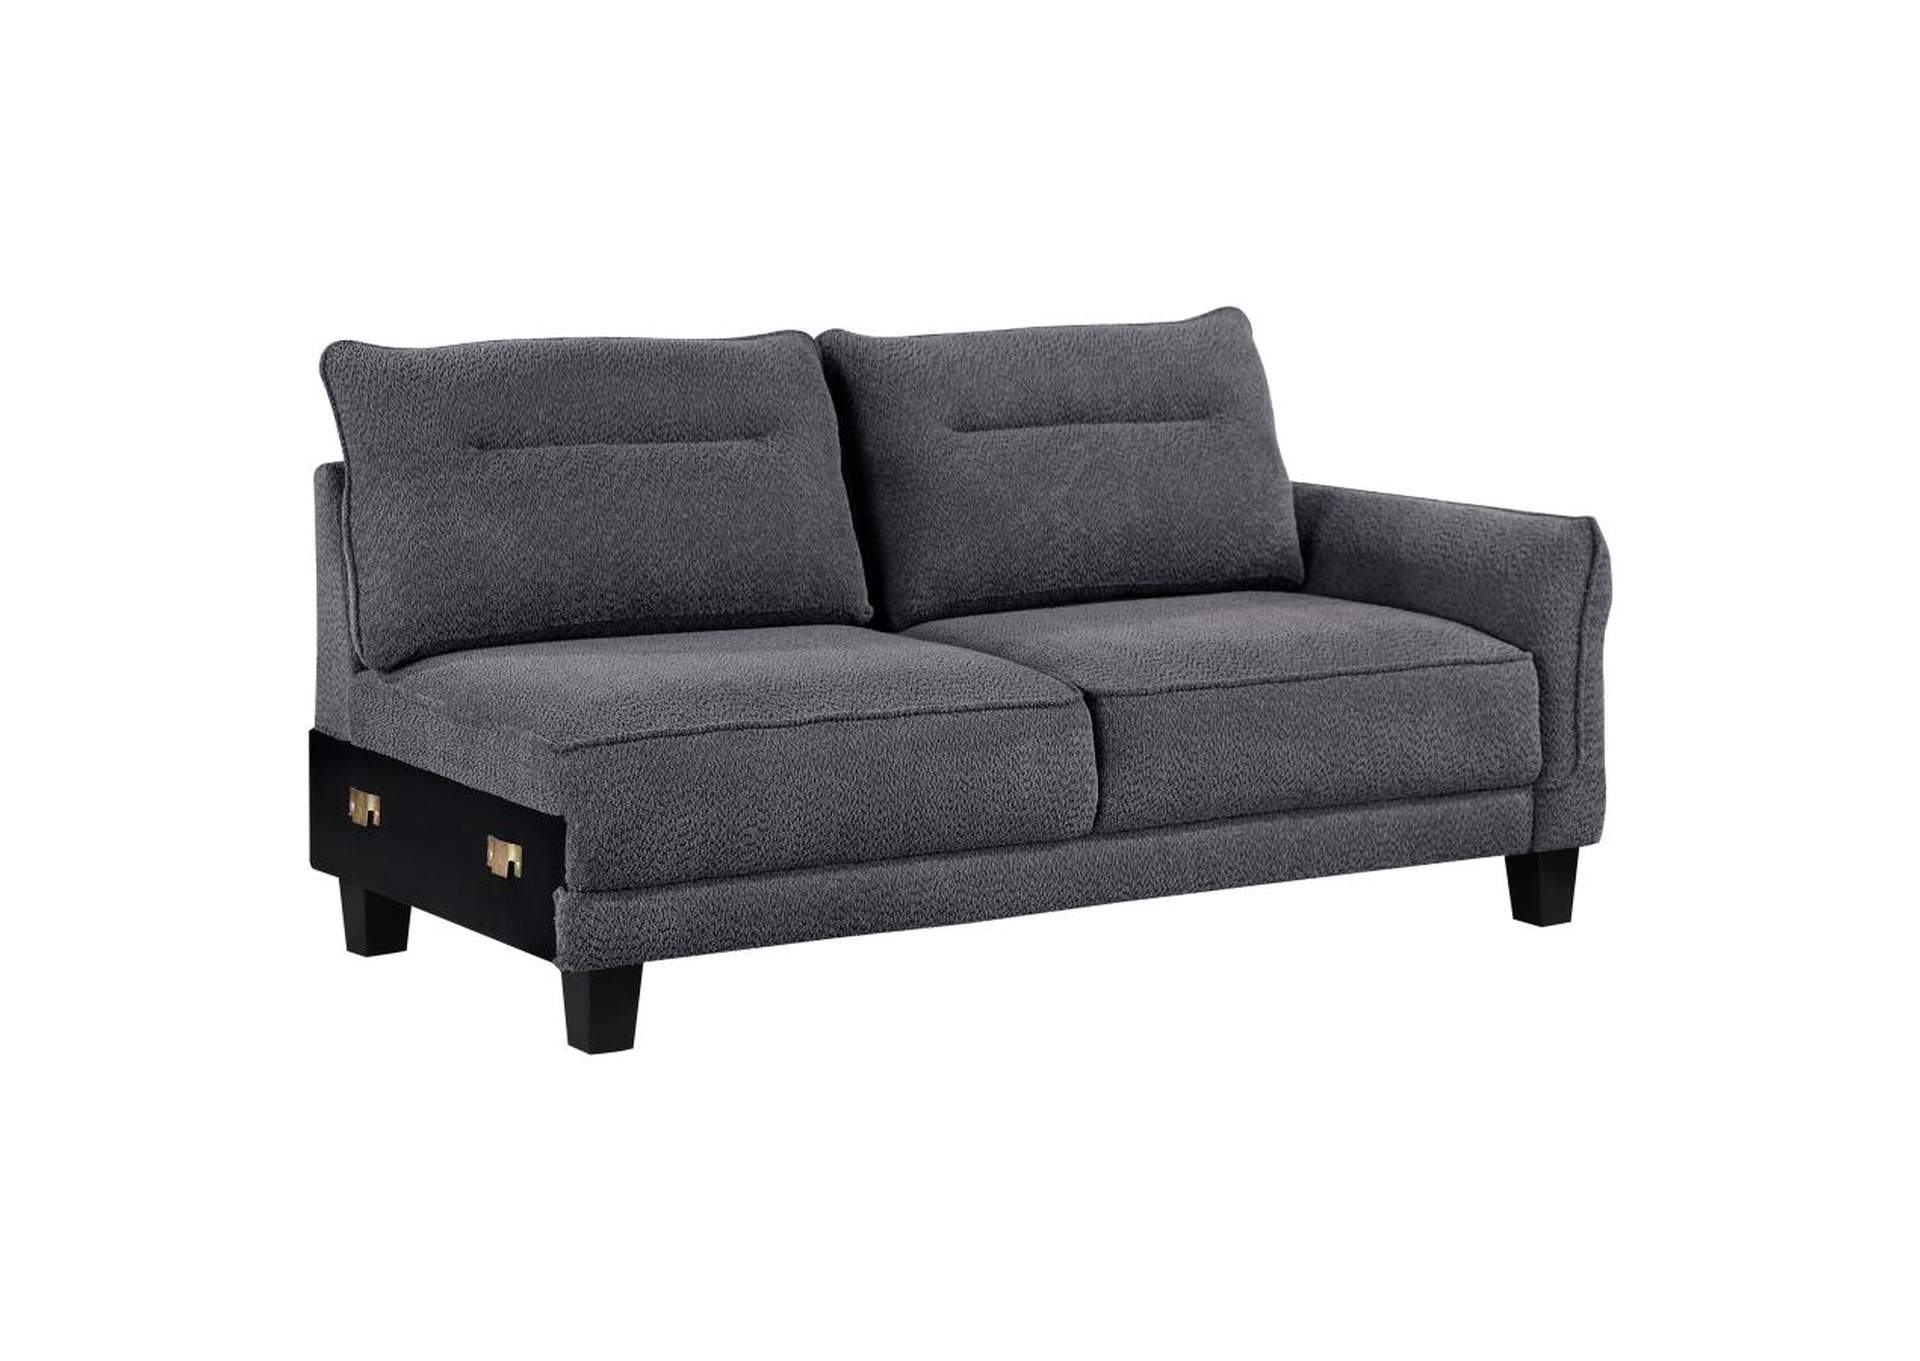 Caspian Upholstered Curved Arms Sectional Sofa Grey,Coaster Furniture